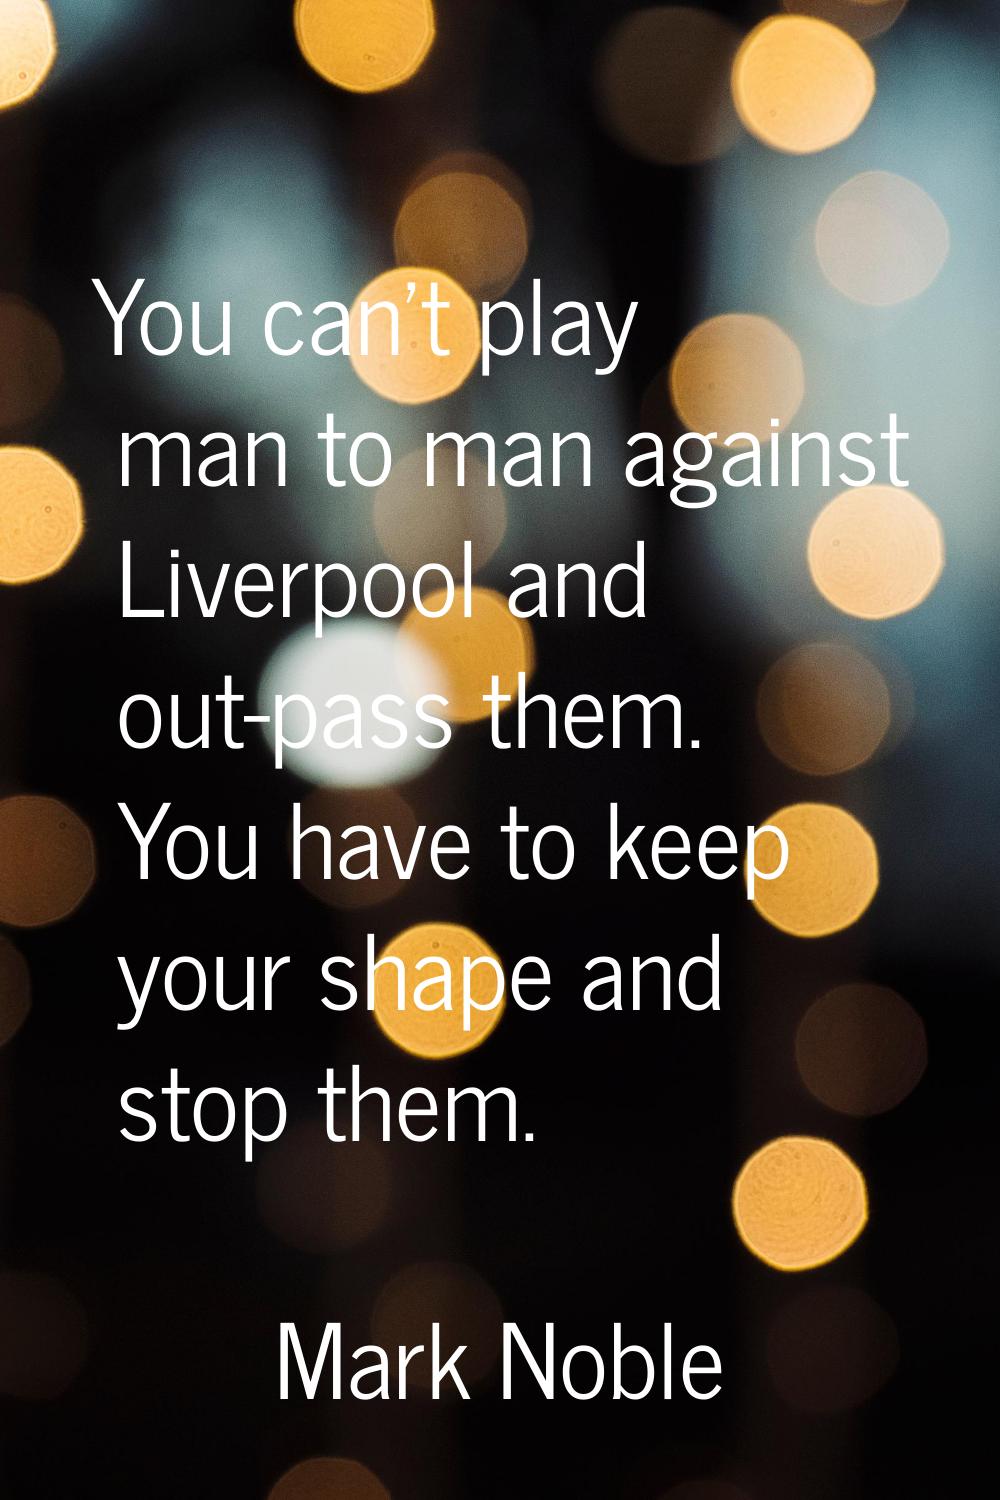 You can't play man to man against Liverpool and out-pass them. You have to keep your shape and stop